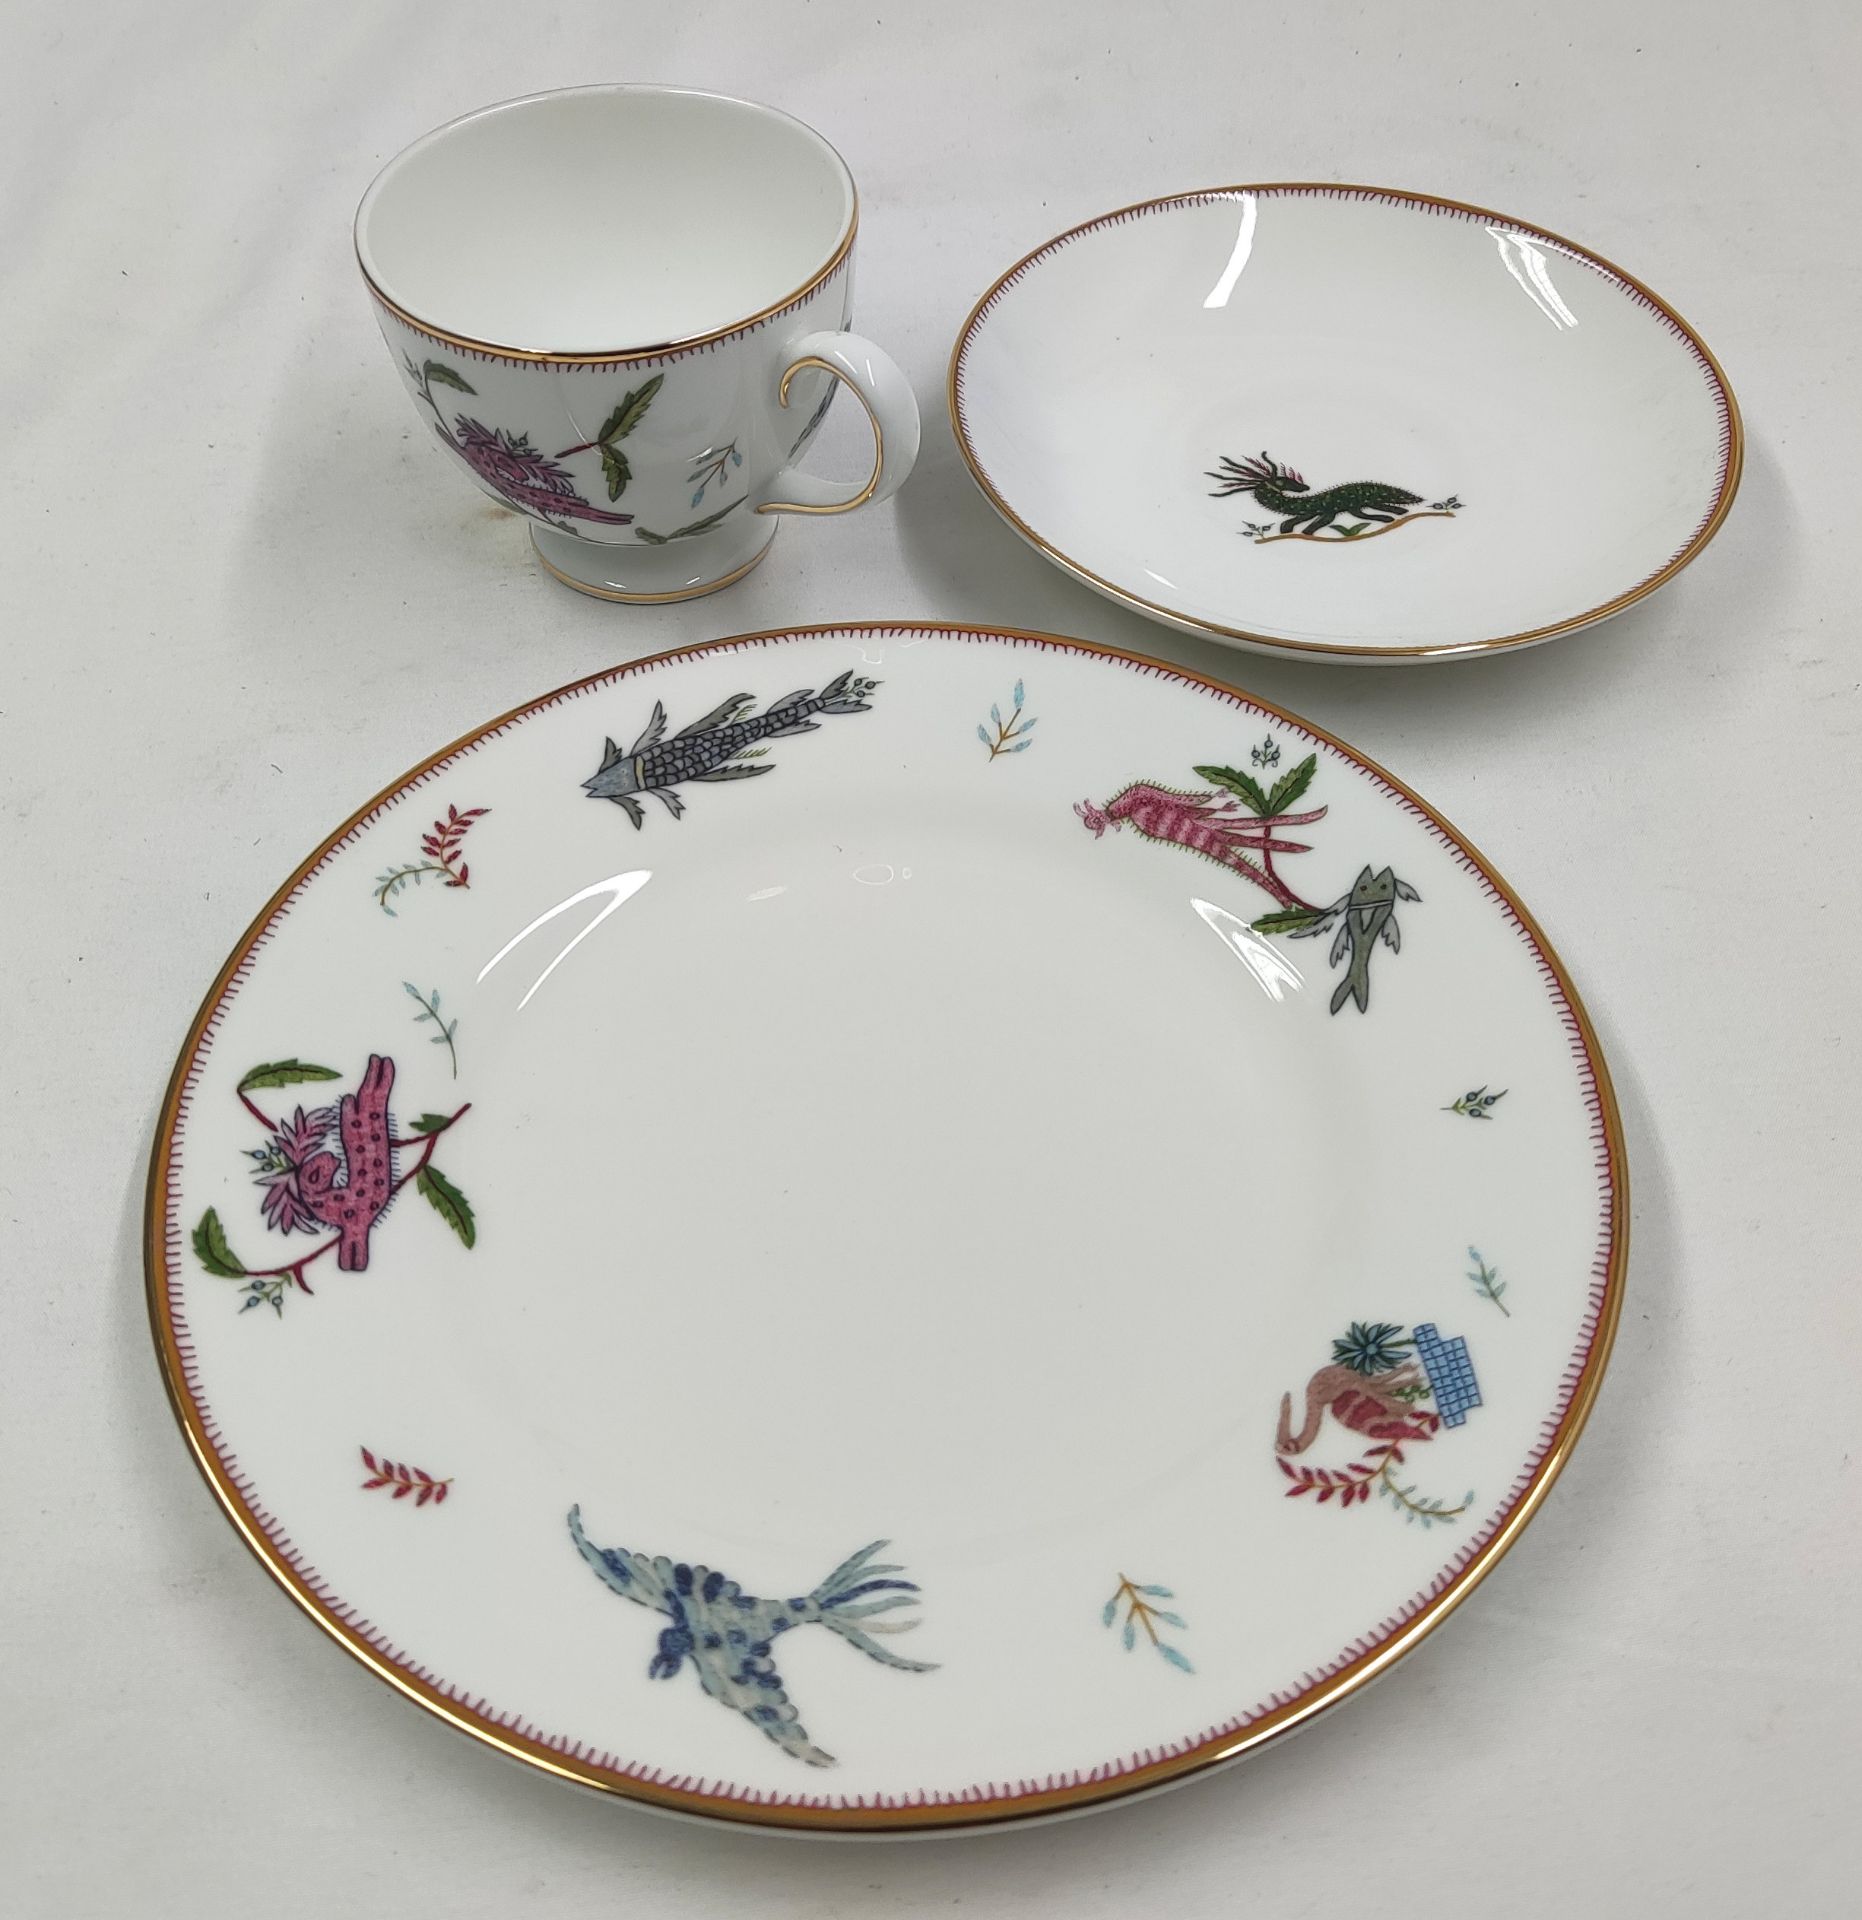 1 x WEDGWOOD Mythical Creatures Fine Bone China Teacup/Saucer/Plate Set - New/Boxed - RRP £140.00 - Image 10 of 20